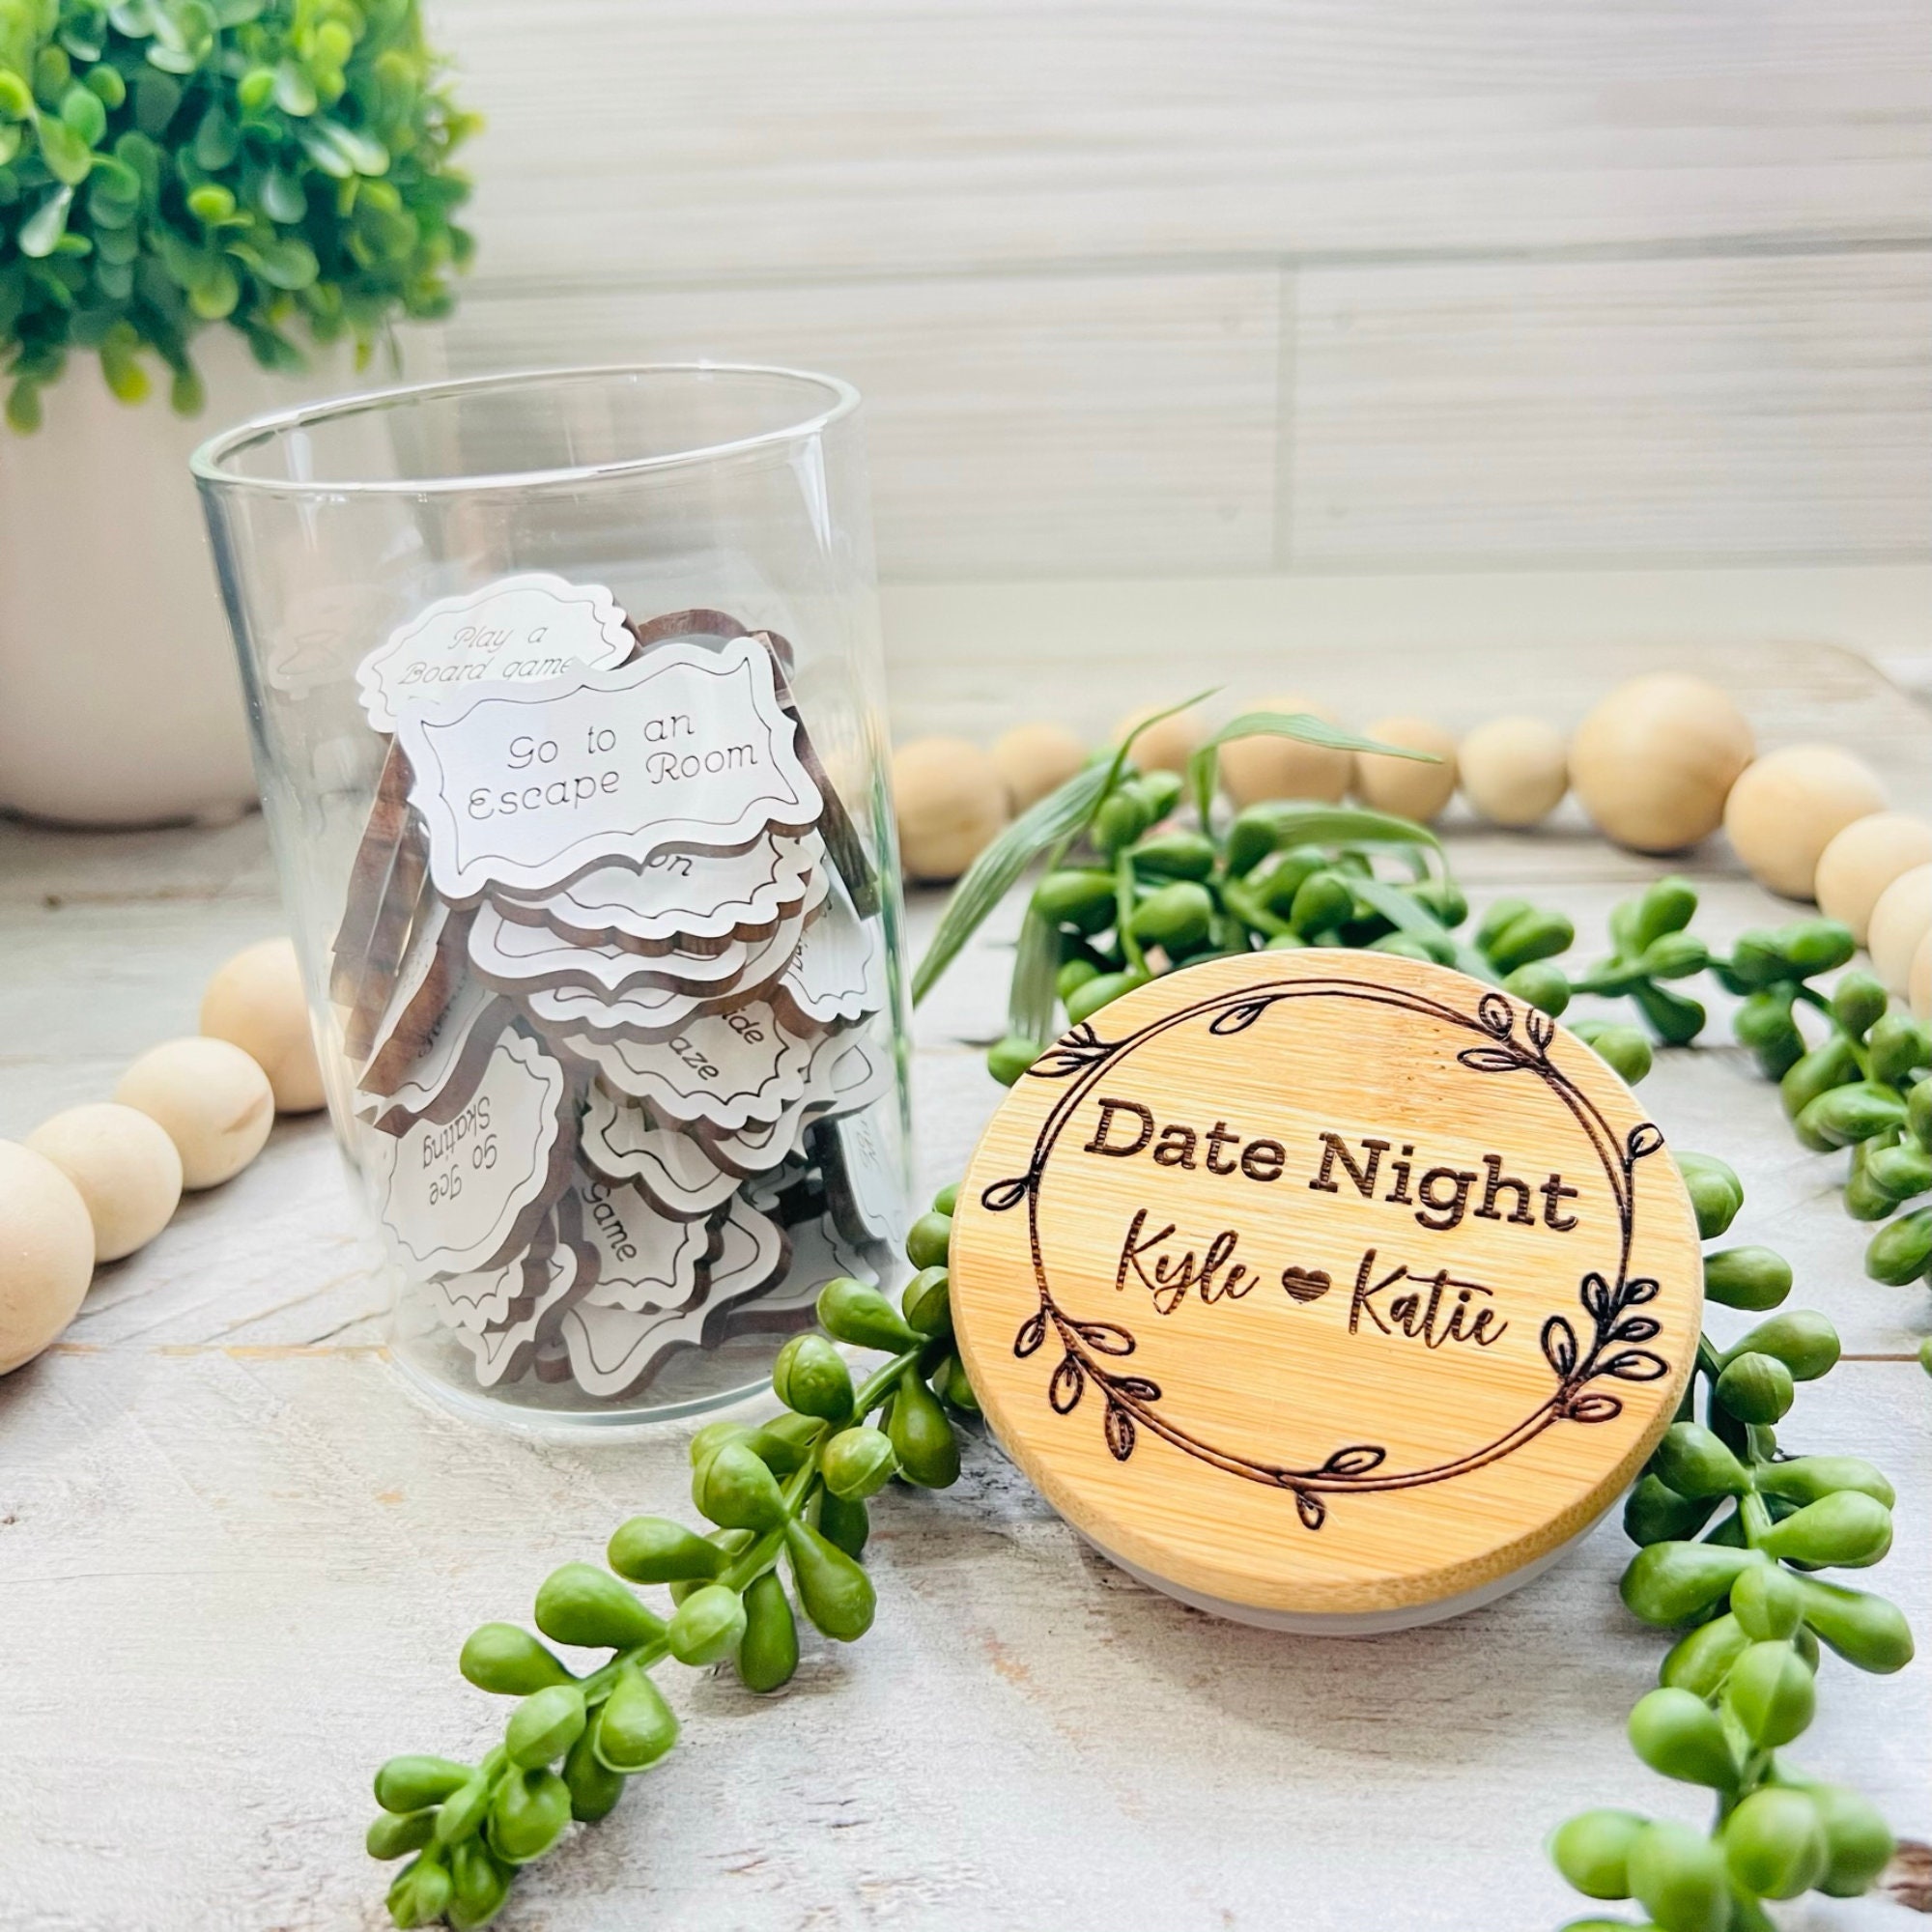 94 Date Night Ideas to Add to Your Date Jar - Free Printable List